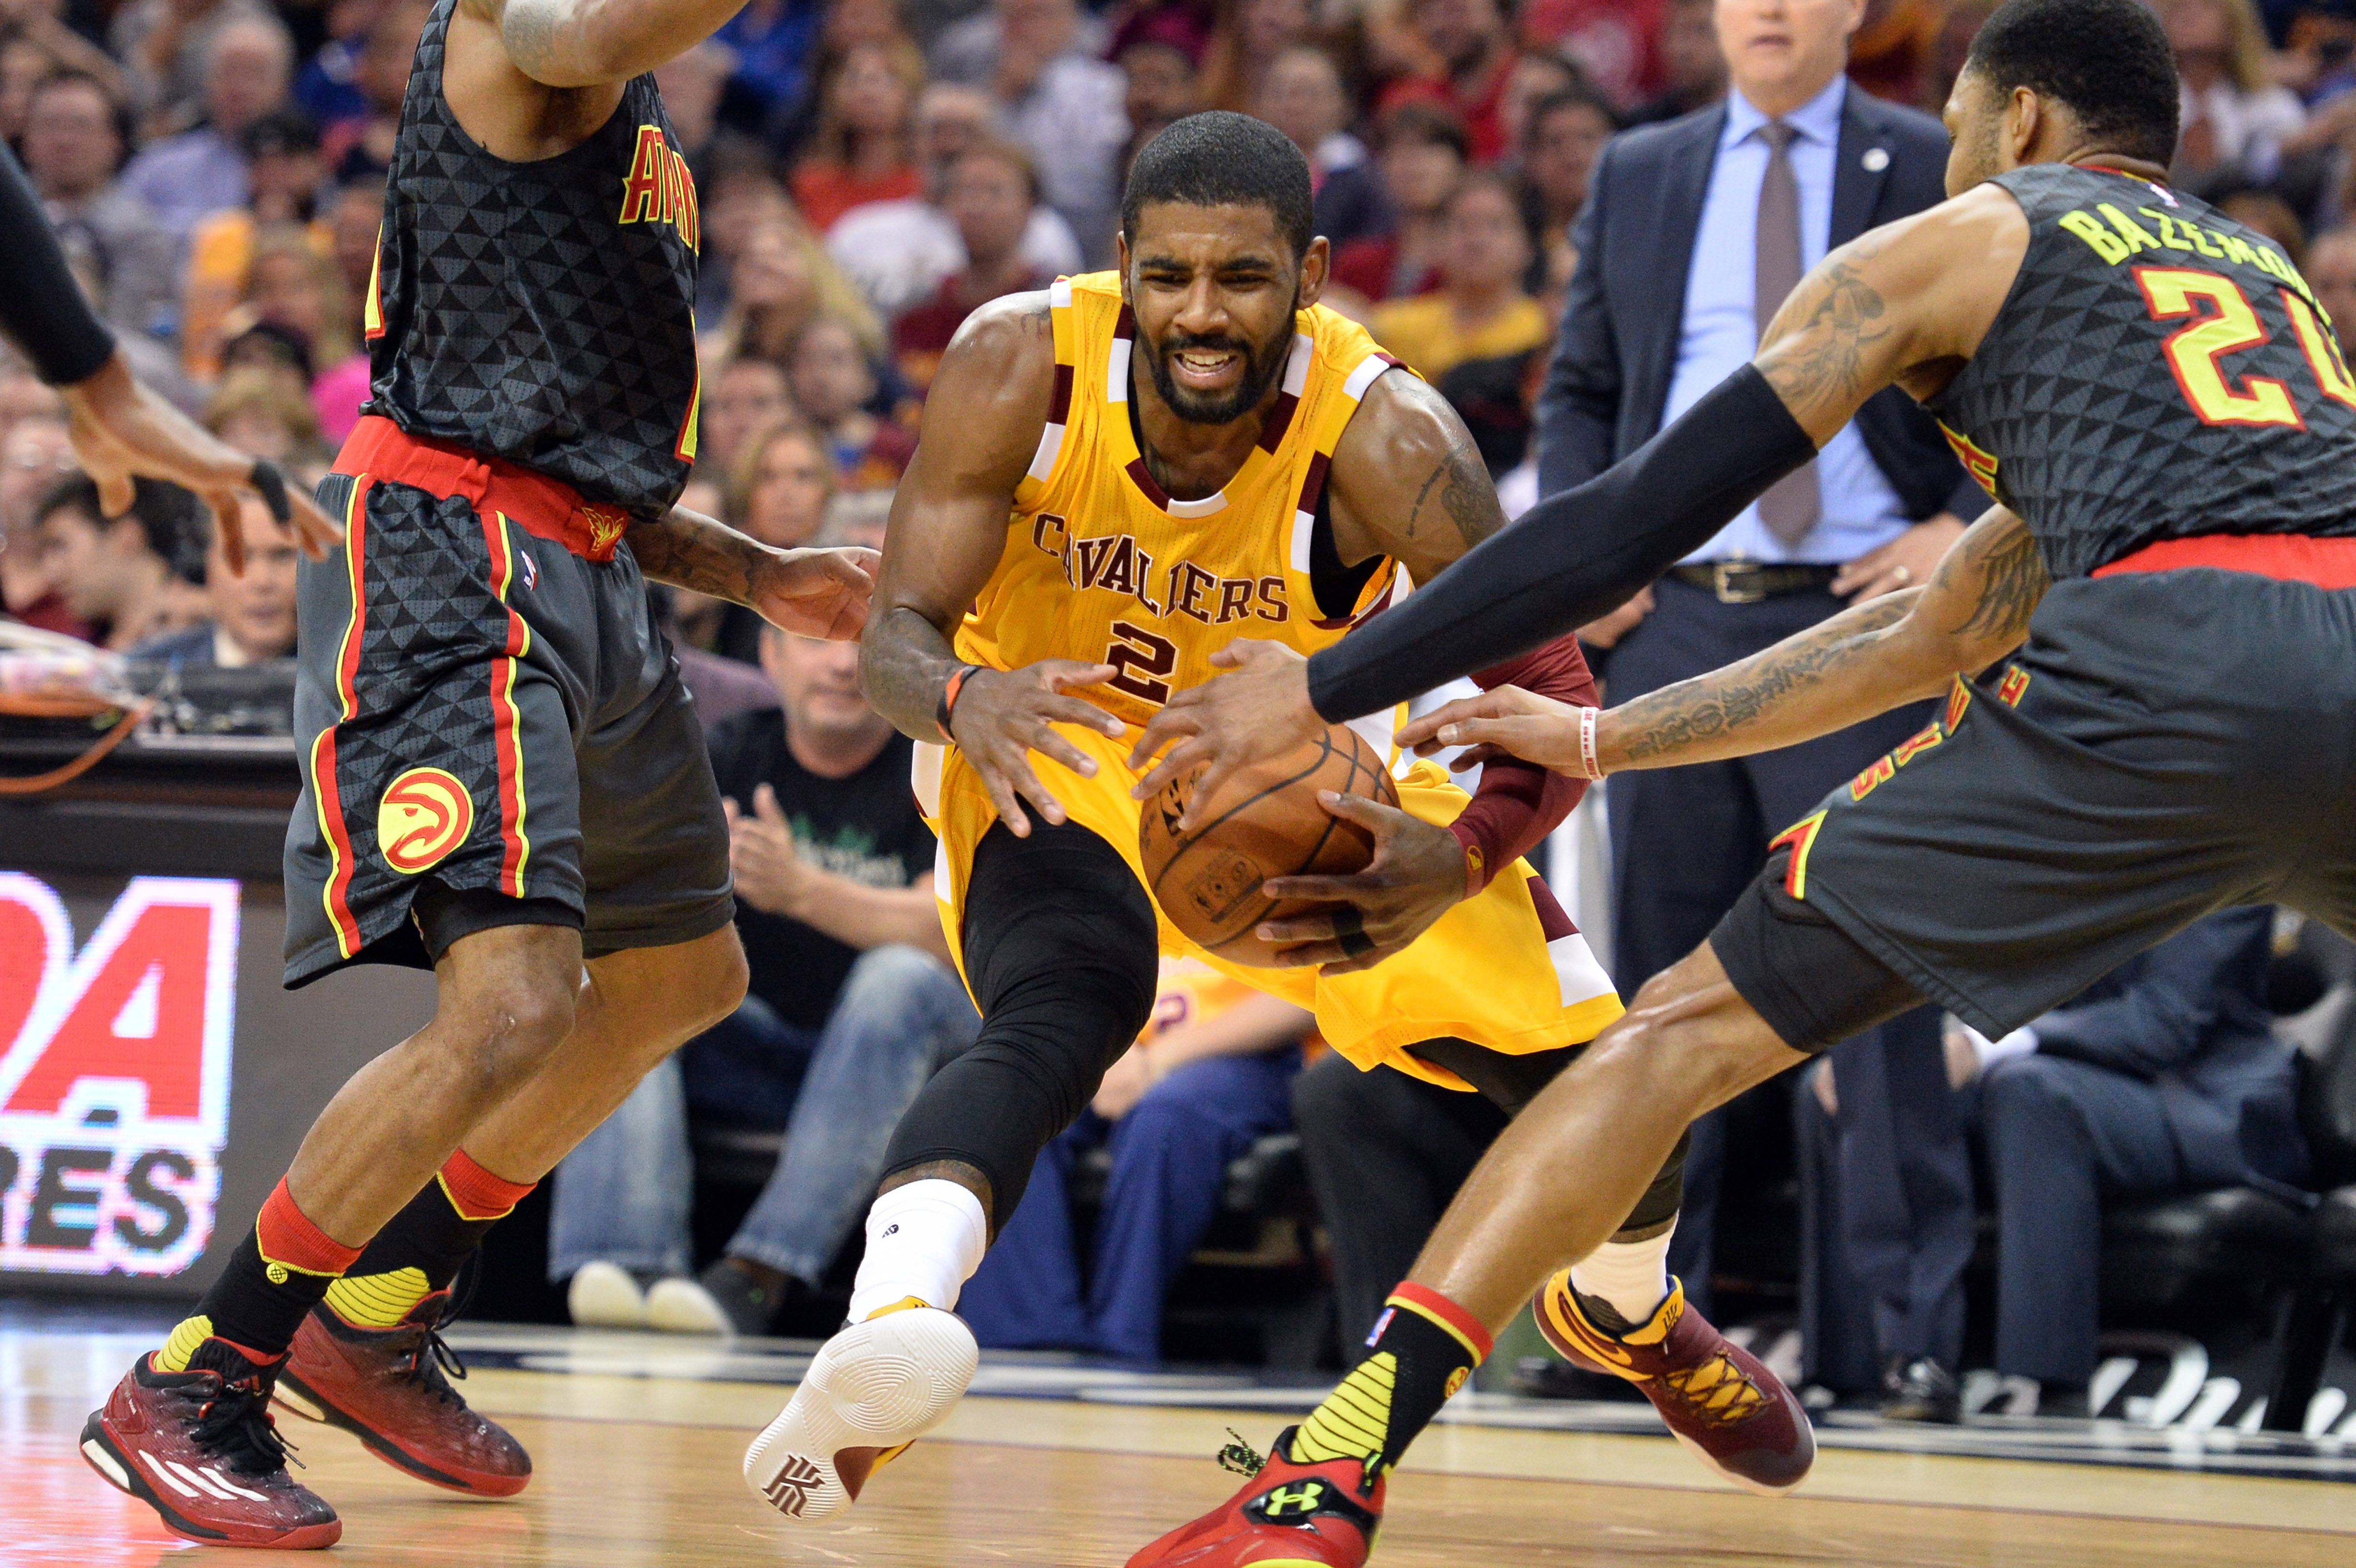 Cleveland Cavaliers lock up top seed in East